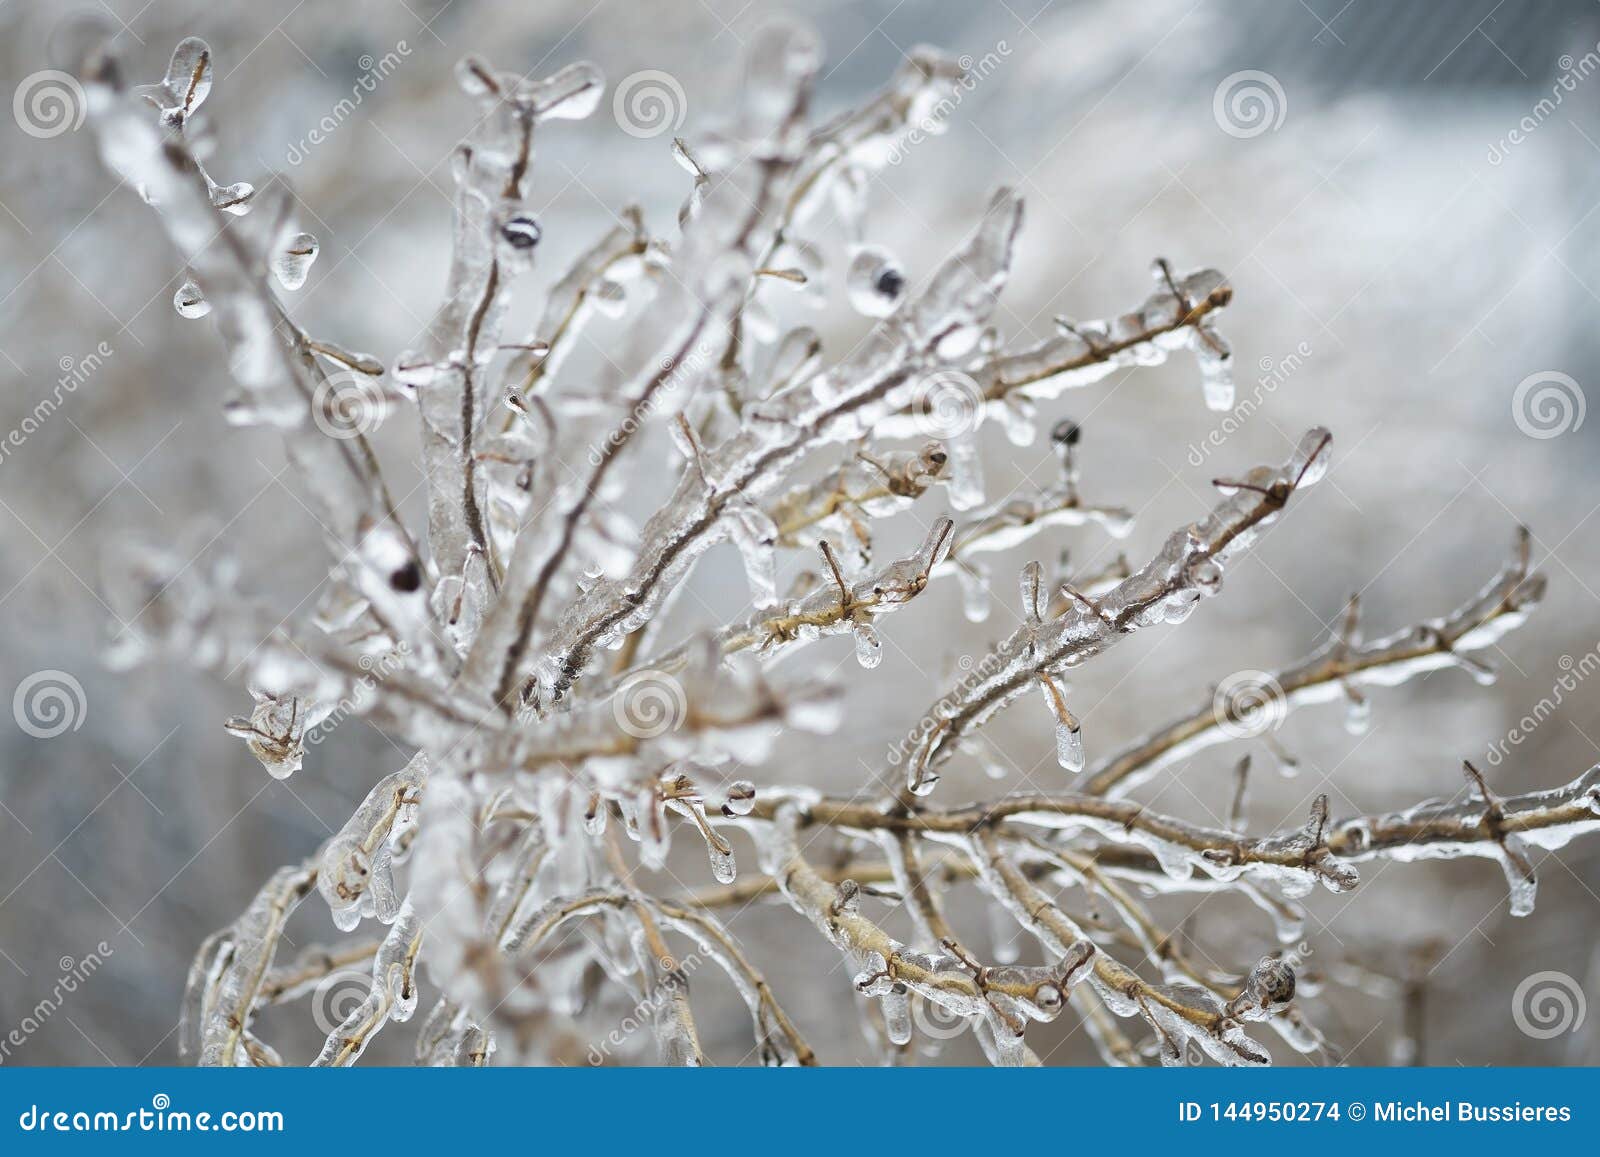 Freezing Rain on a Branches Stock Photo - Image of rain, storm: 144950274